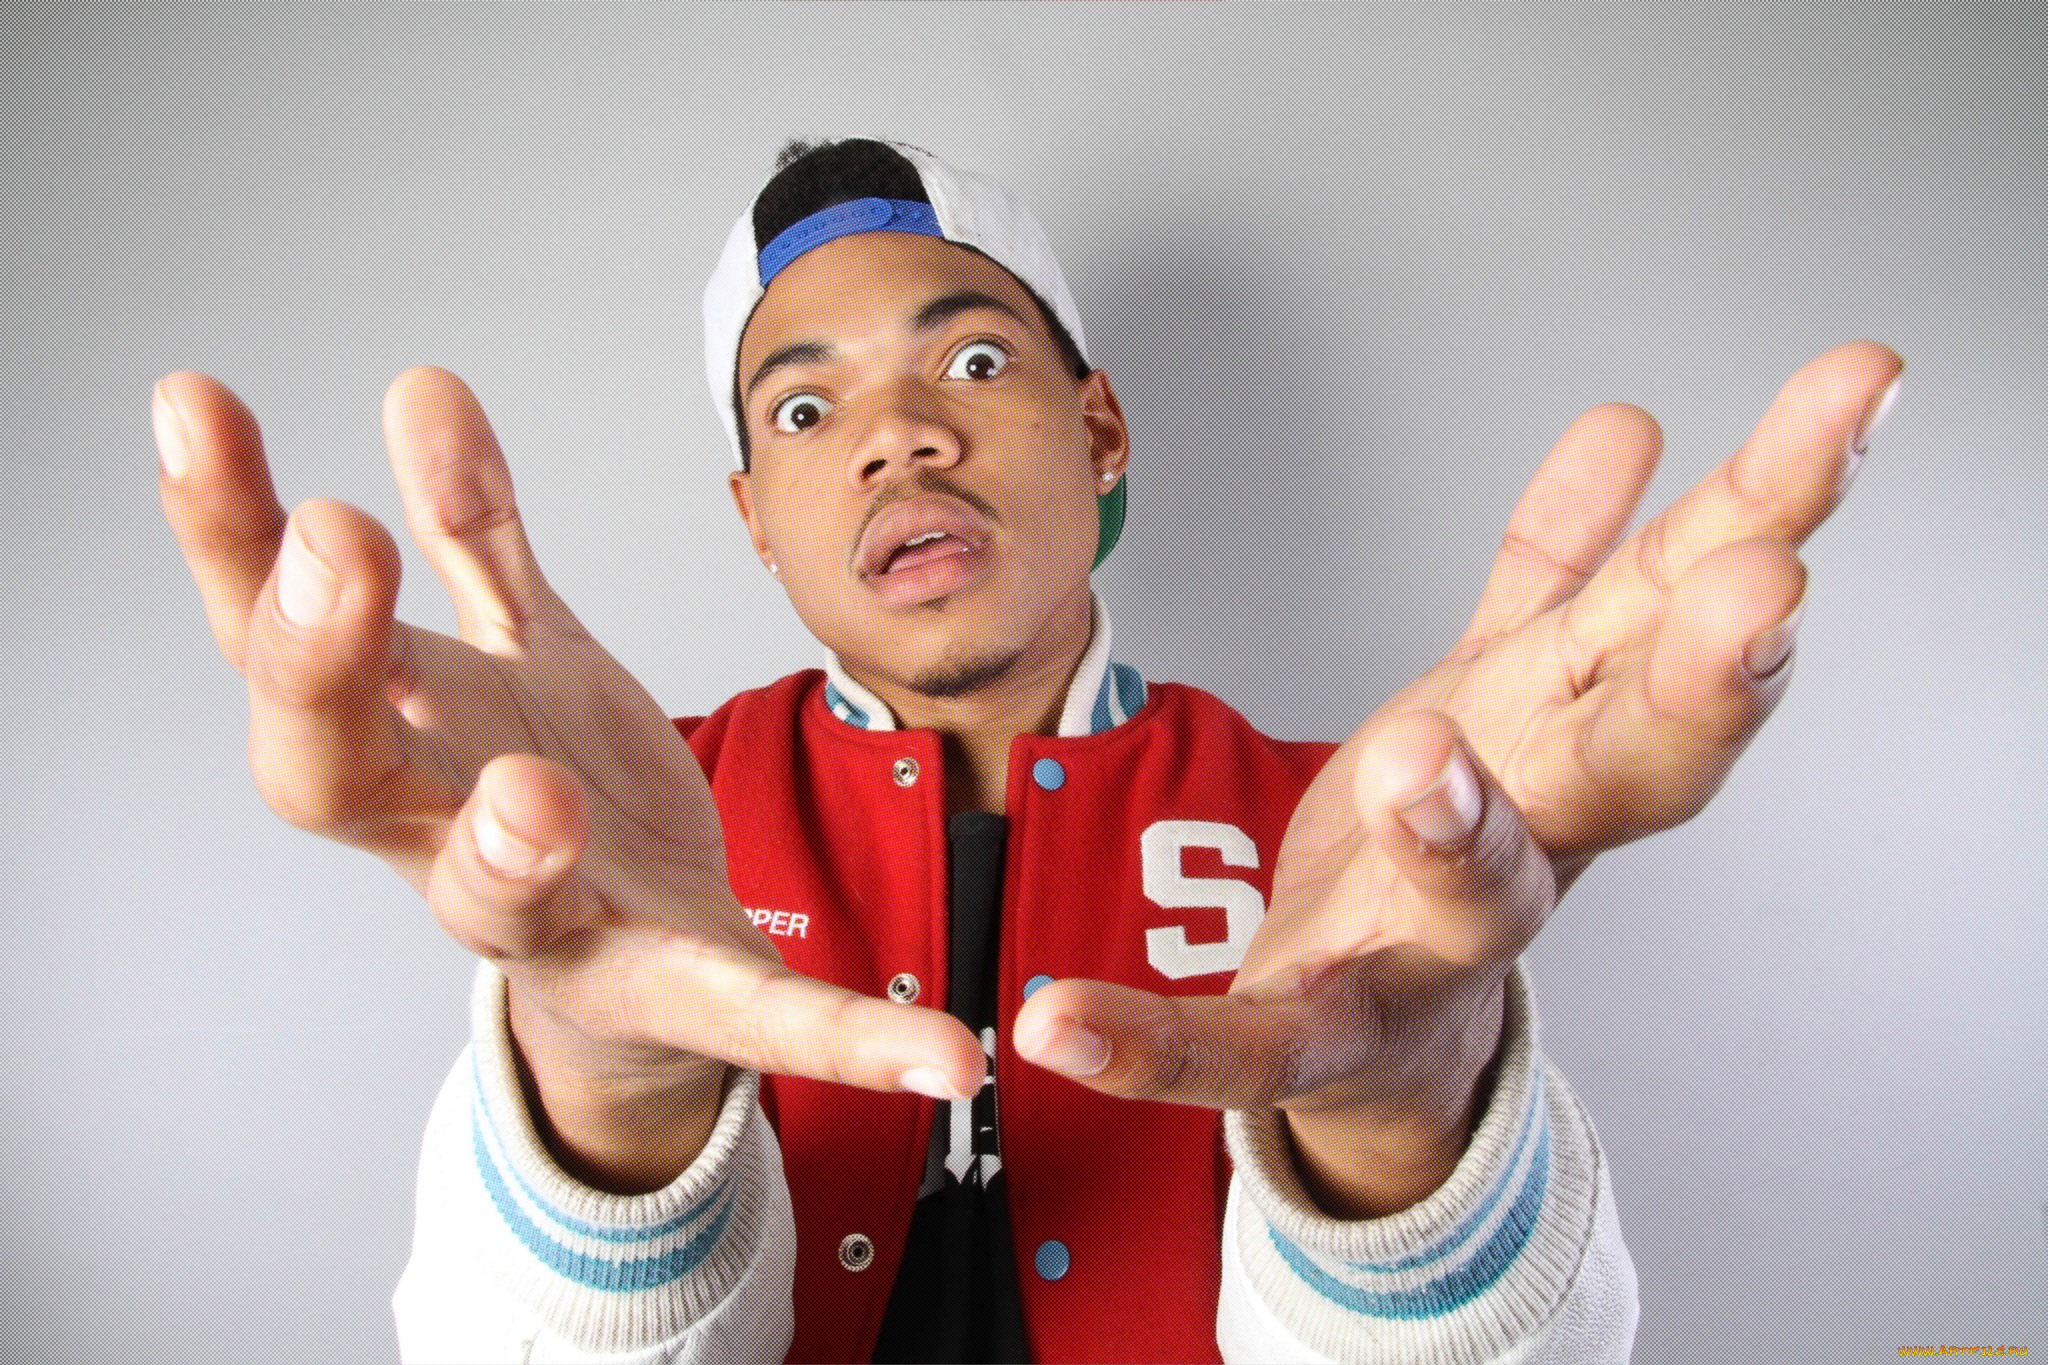 chance-the-rapper, , chance the rapper, 